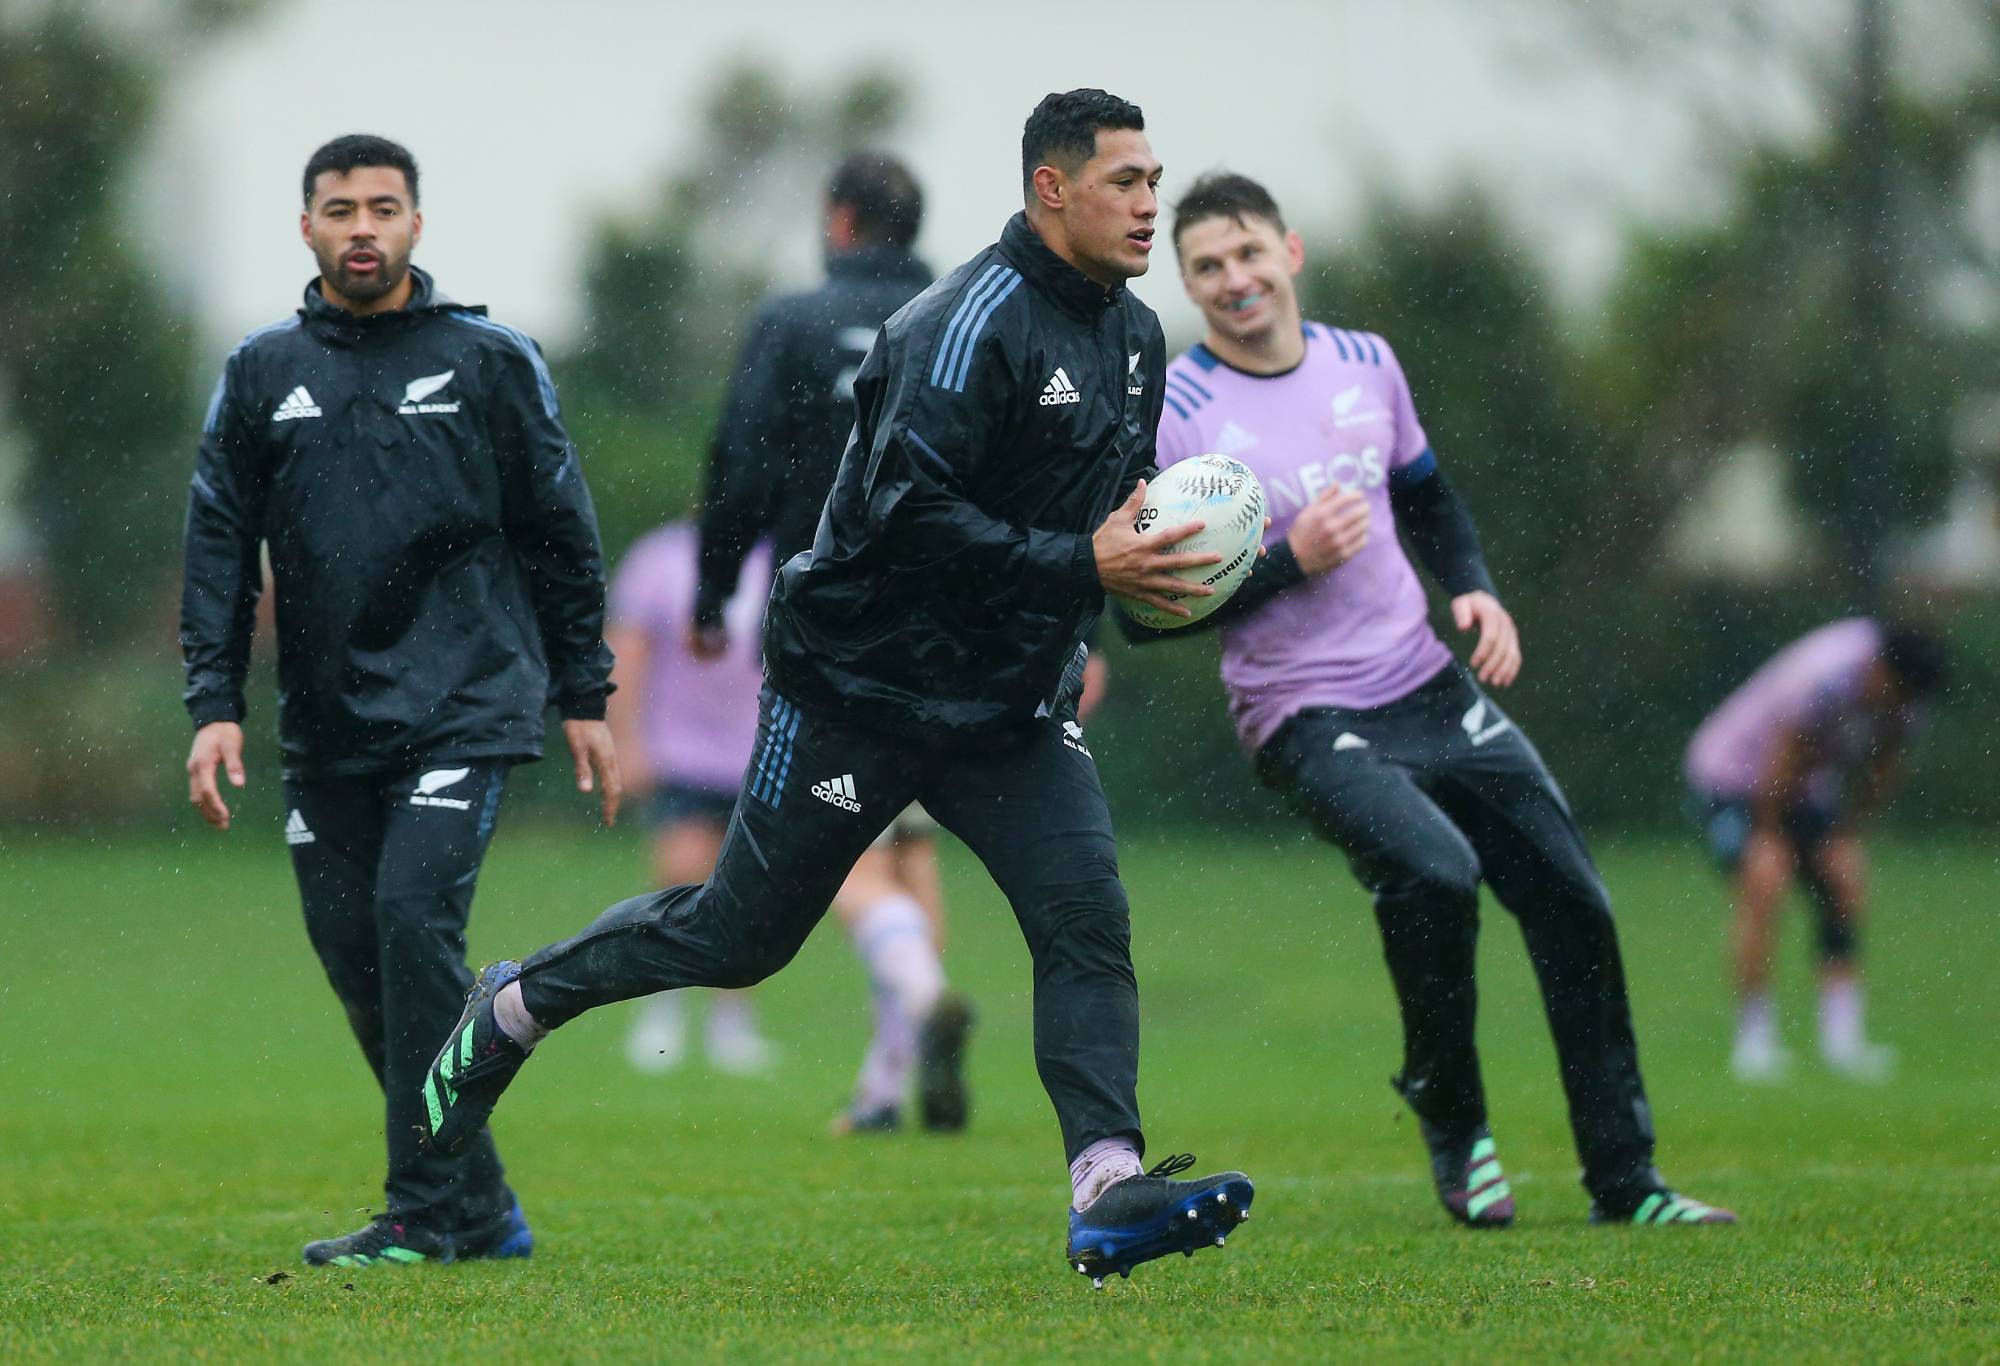 Roger Tuivasa-Sheck in action during a New Zealand All Blacks training session at Hutt Recreation Ground on July 12, 2022 in Lower Hutt, New Zealand. (Photo by Hagen Hopkins/Getty Images)